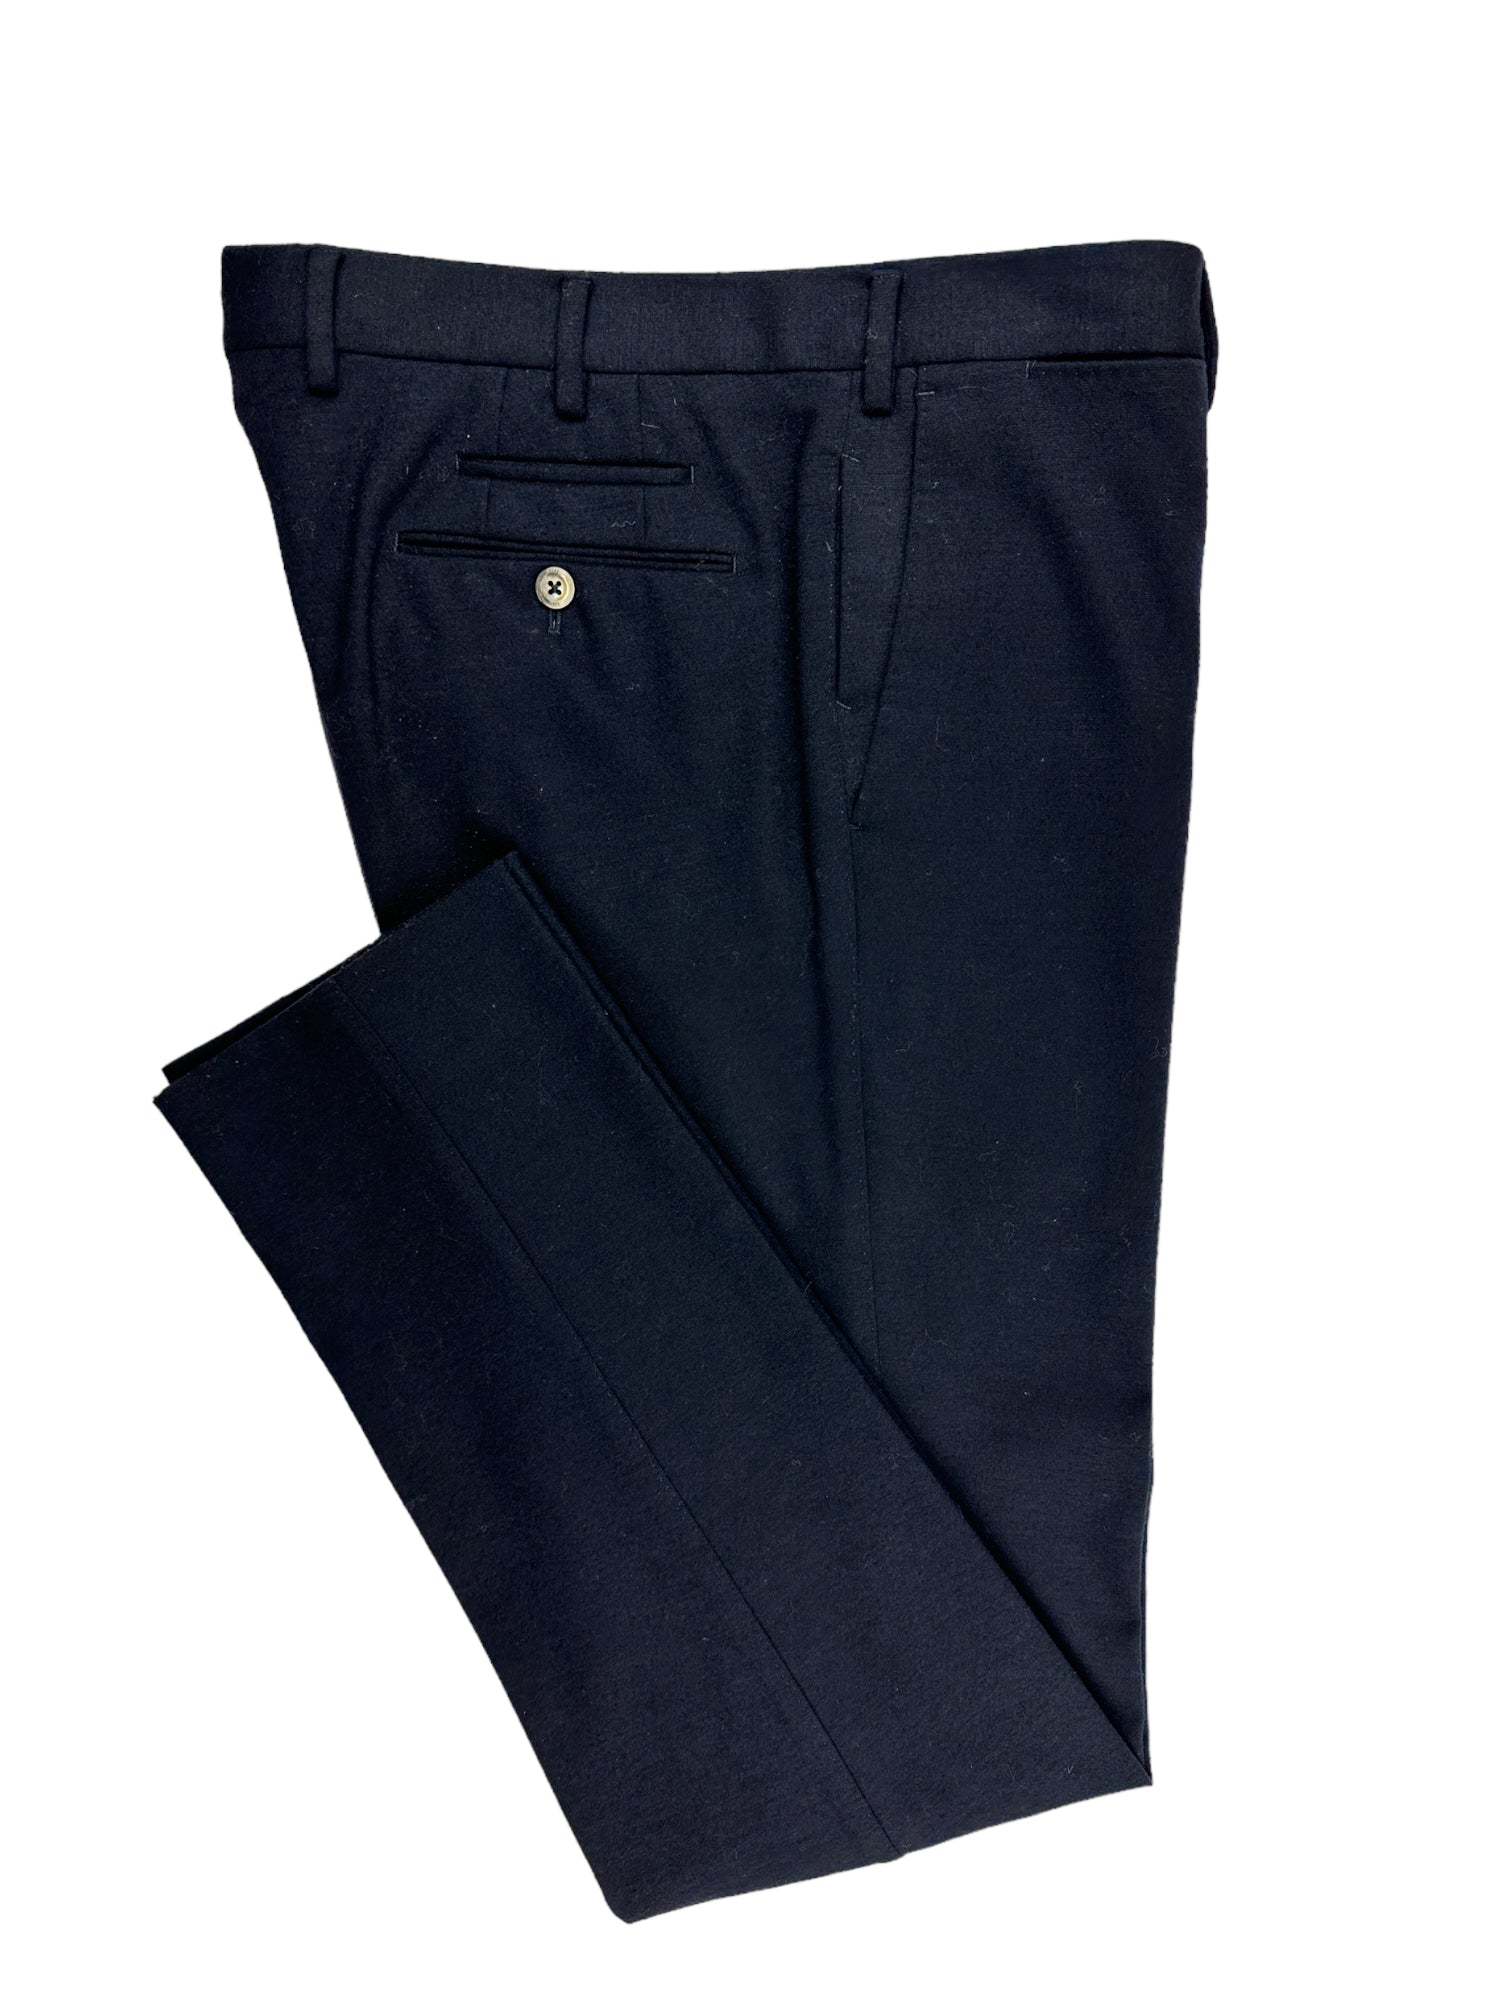 PT01 Navy Flannel Trousers